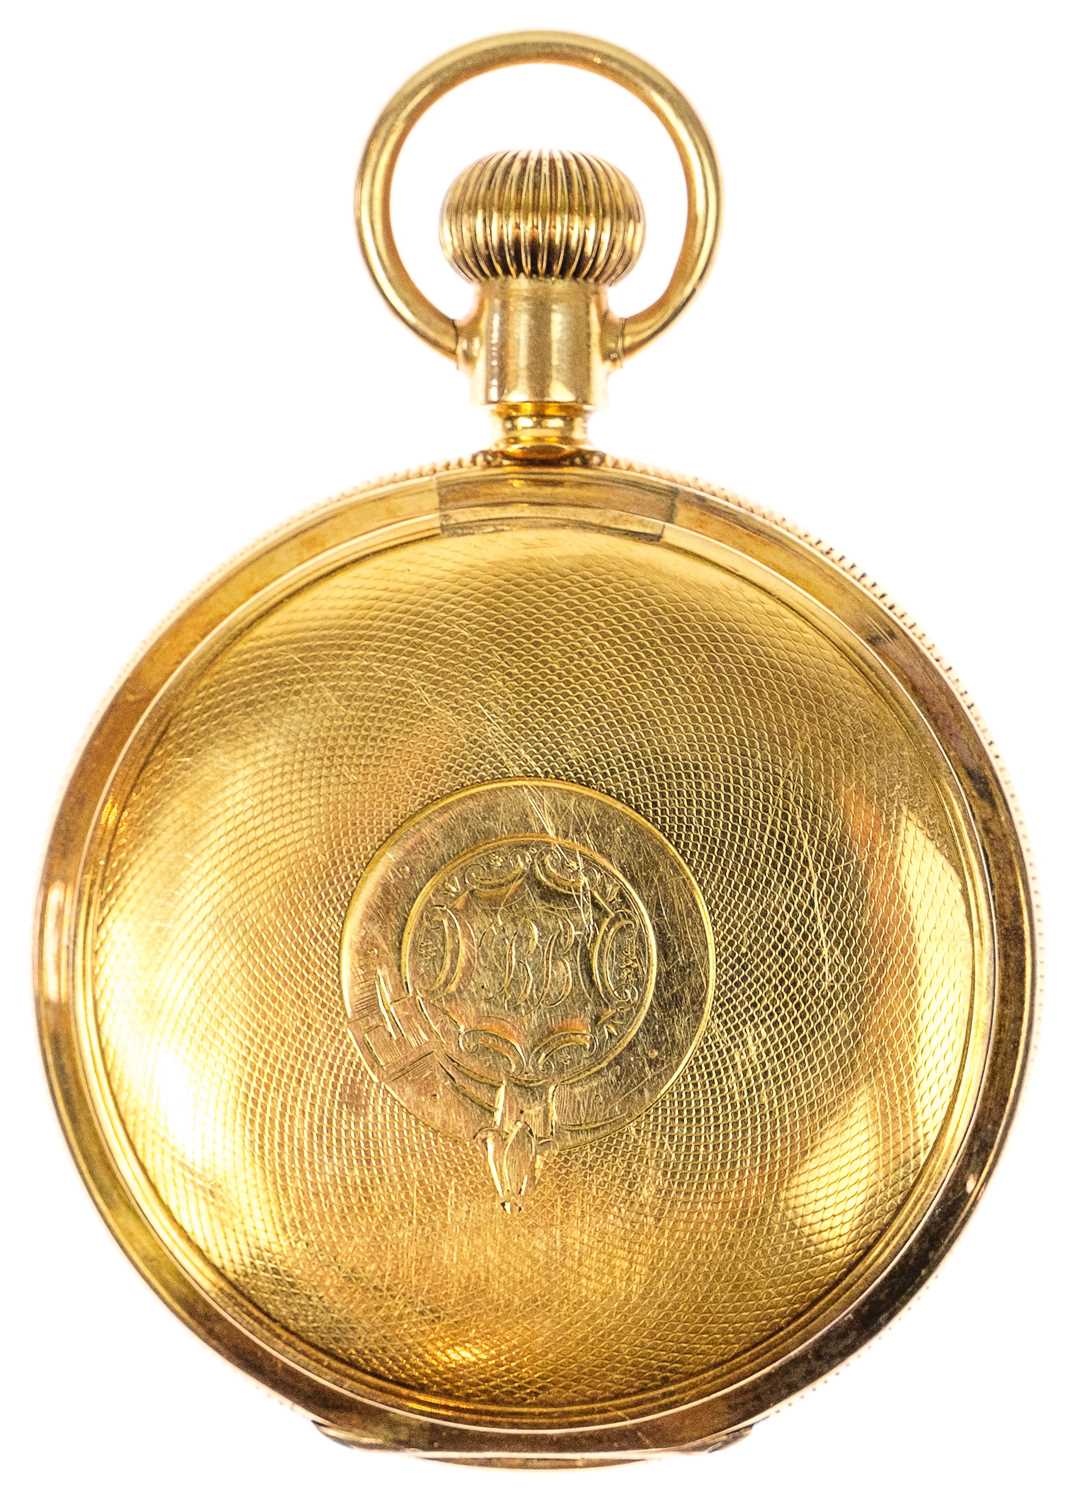 WALTHAM - A 14ct full hunter crown wind pocket watch. - Image 3 of 7